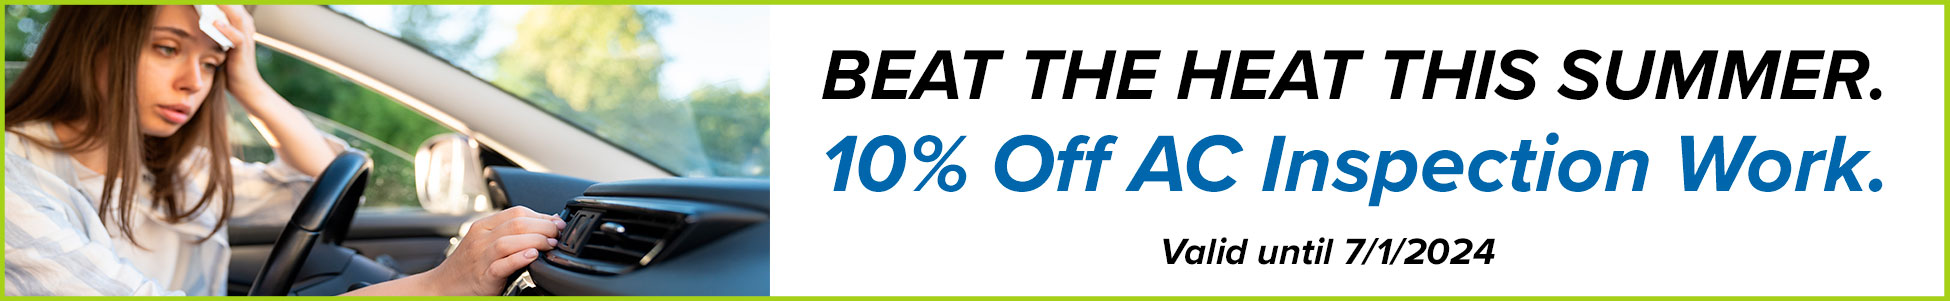 Beat the heat this summer. 10% Off AC Inspection Work. Valid until 7/1/2024